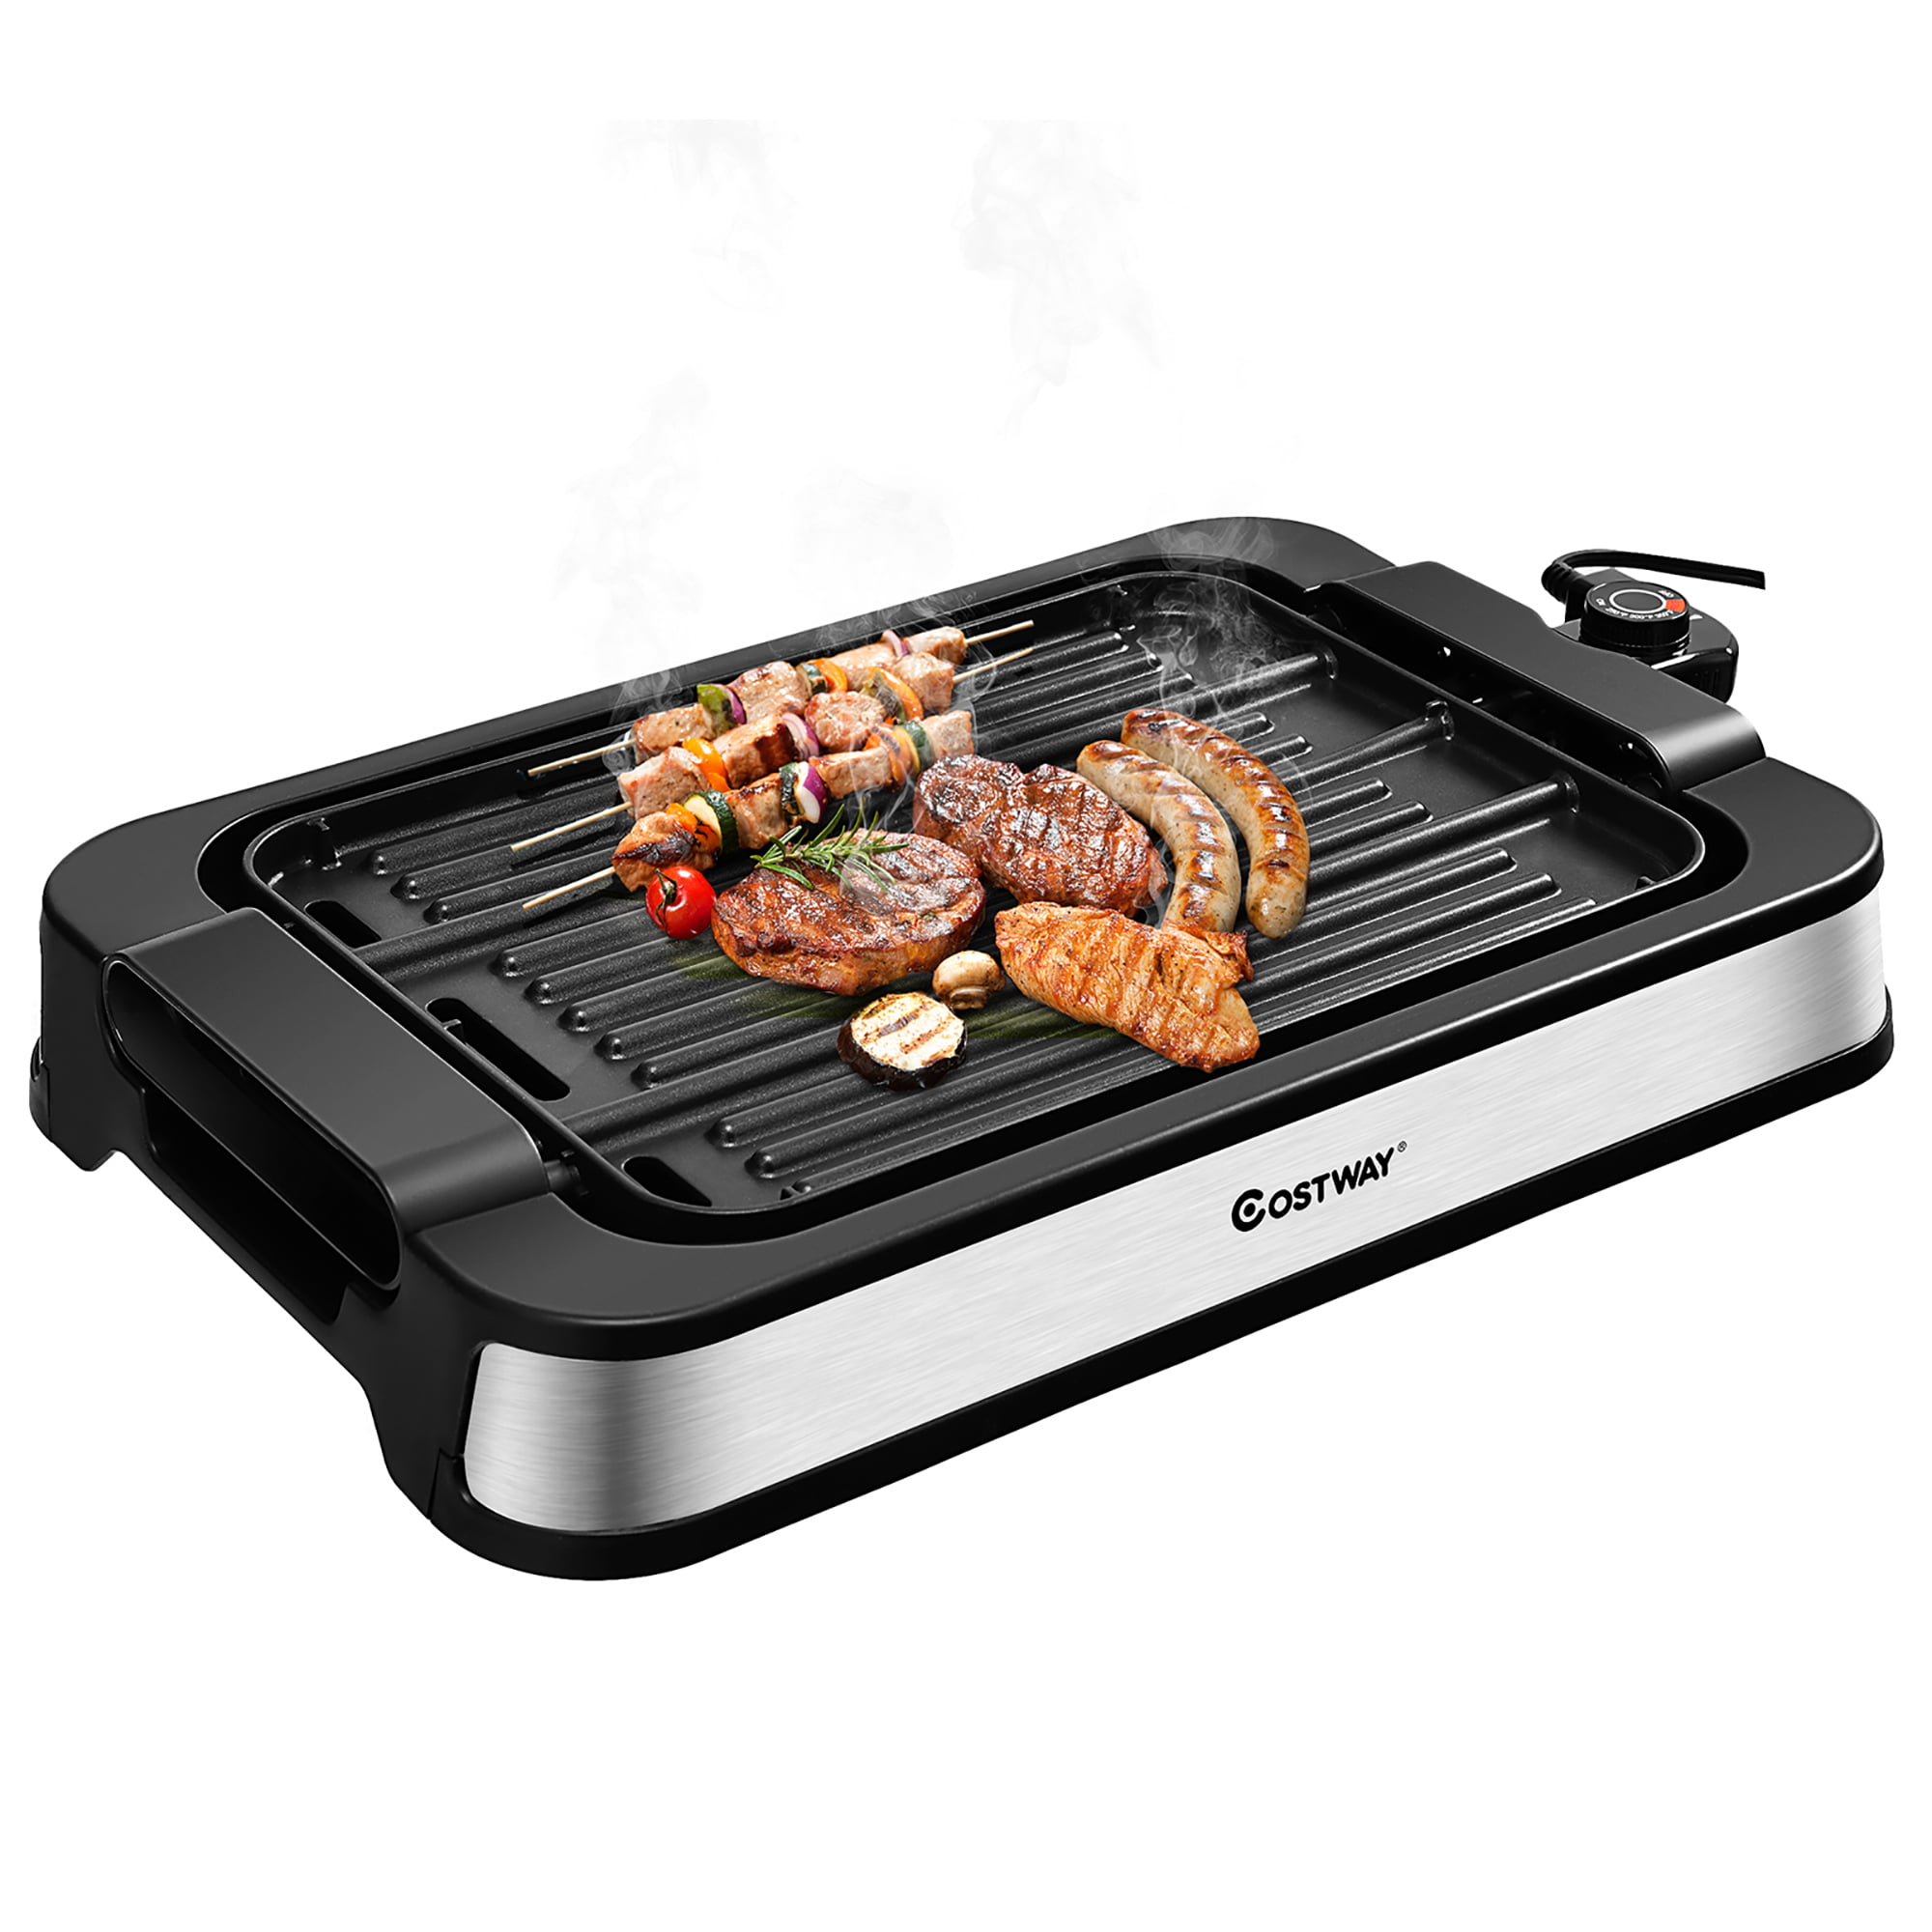 Electric BBQ Grill,Smokeless Indoor Coated Griddle Pan,10 inch Round Nonstick Plate Portable, Medical Stone Coating Easy Cleaning,Grilling Surface